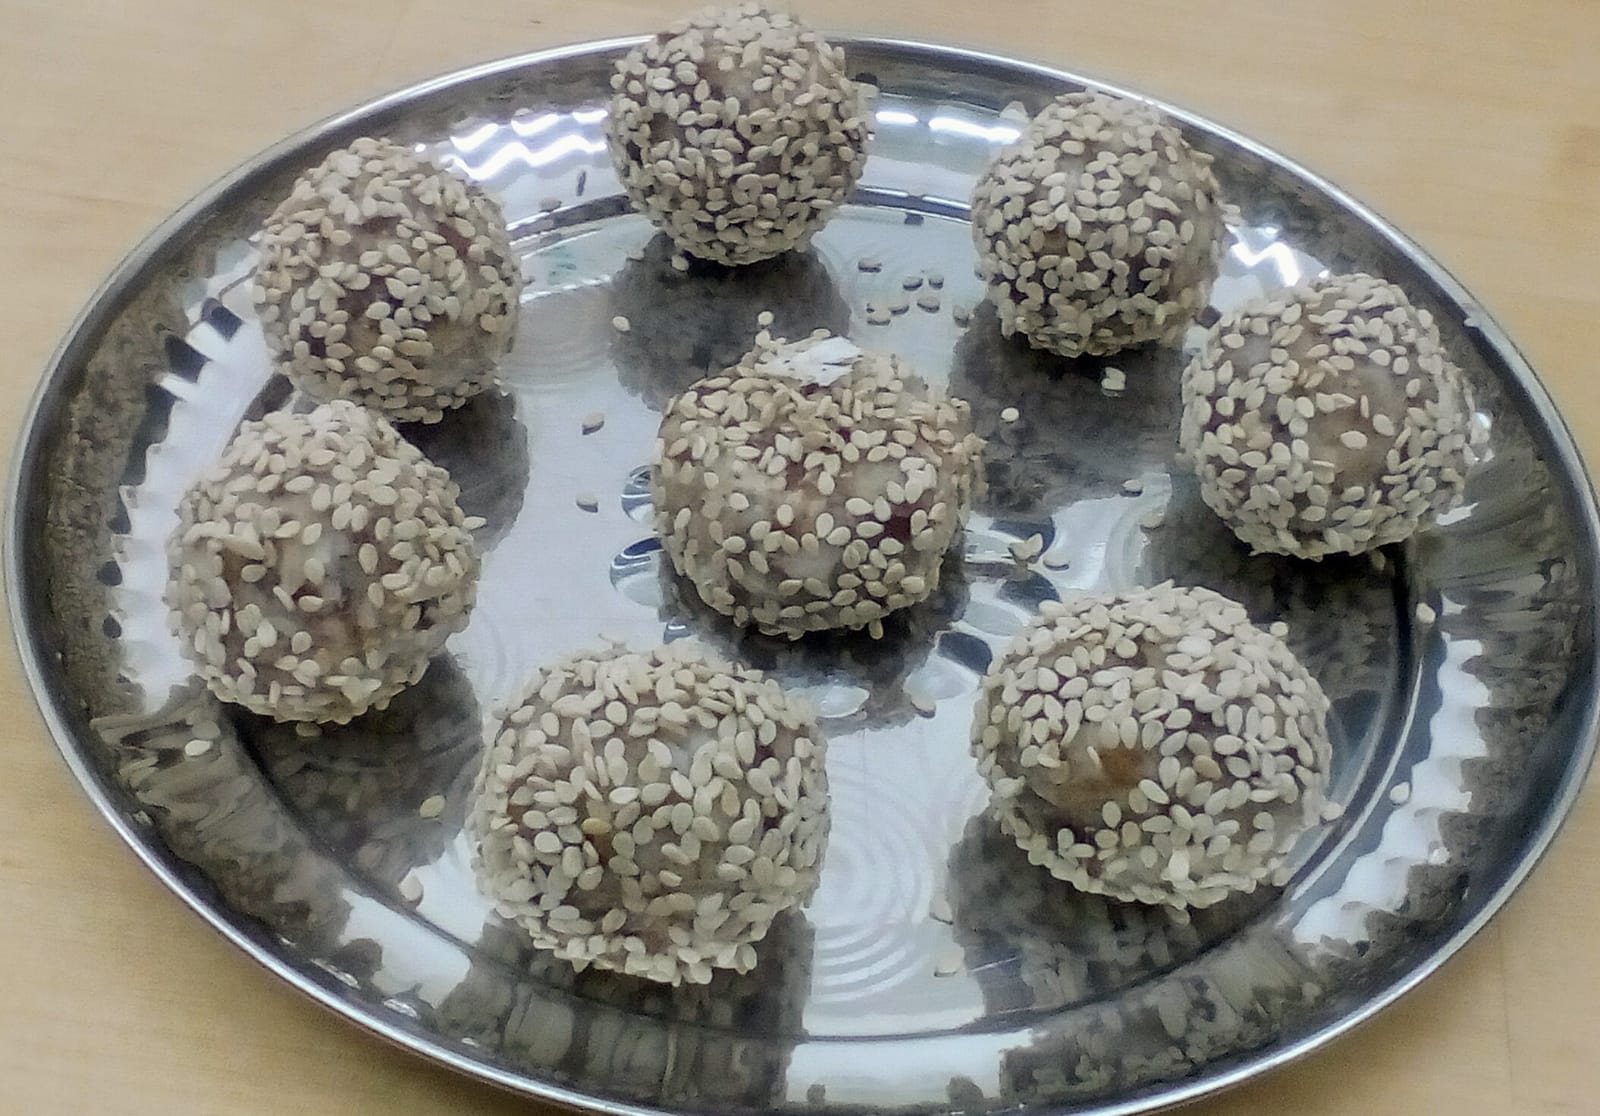 Coconut and date balls with sesame seeds